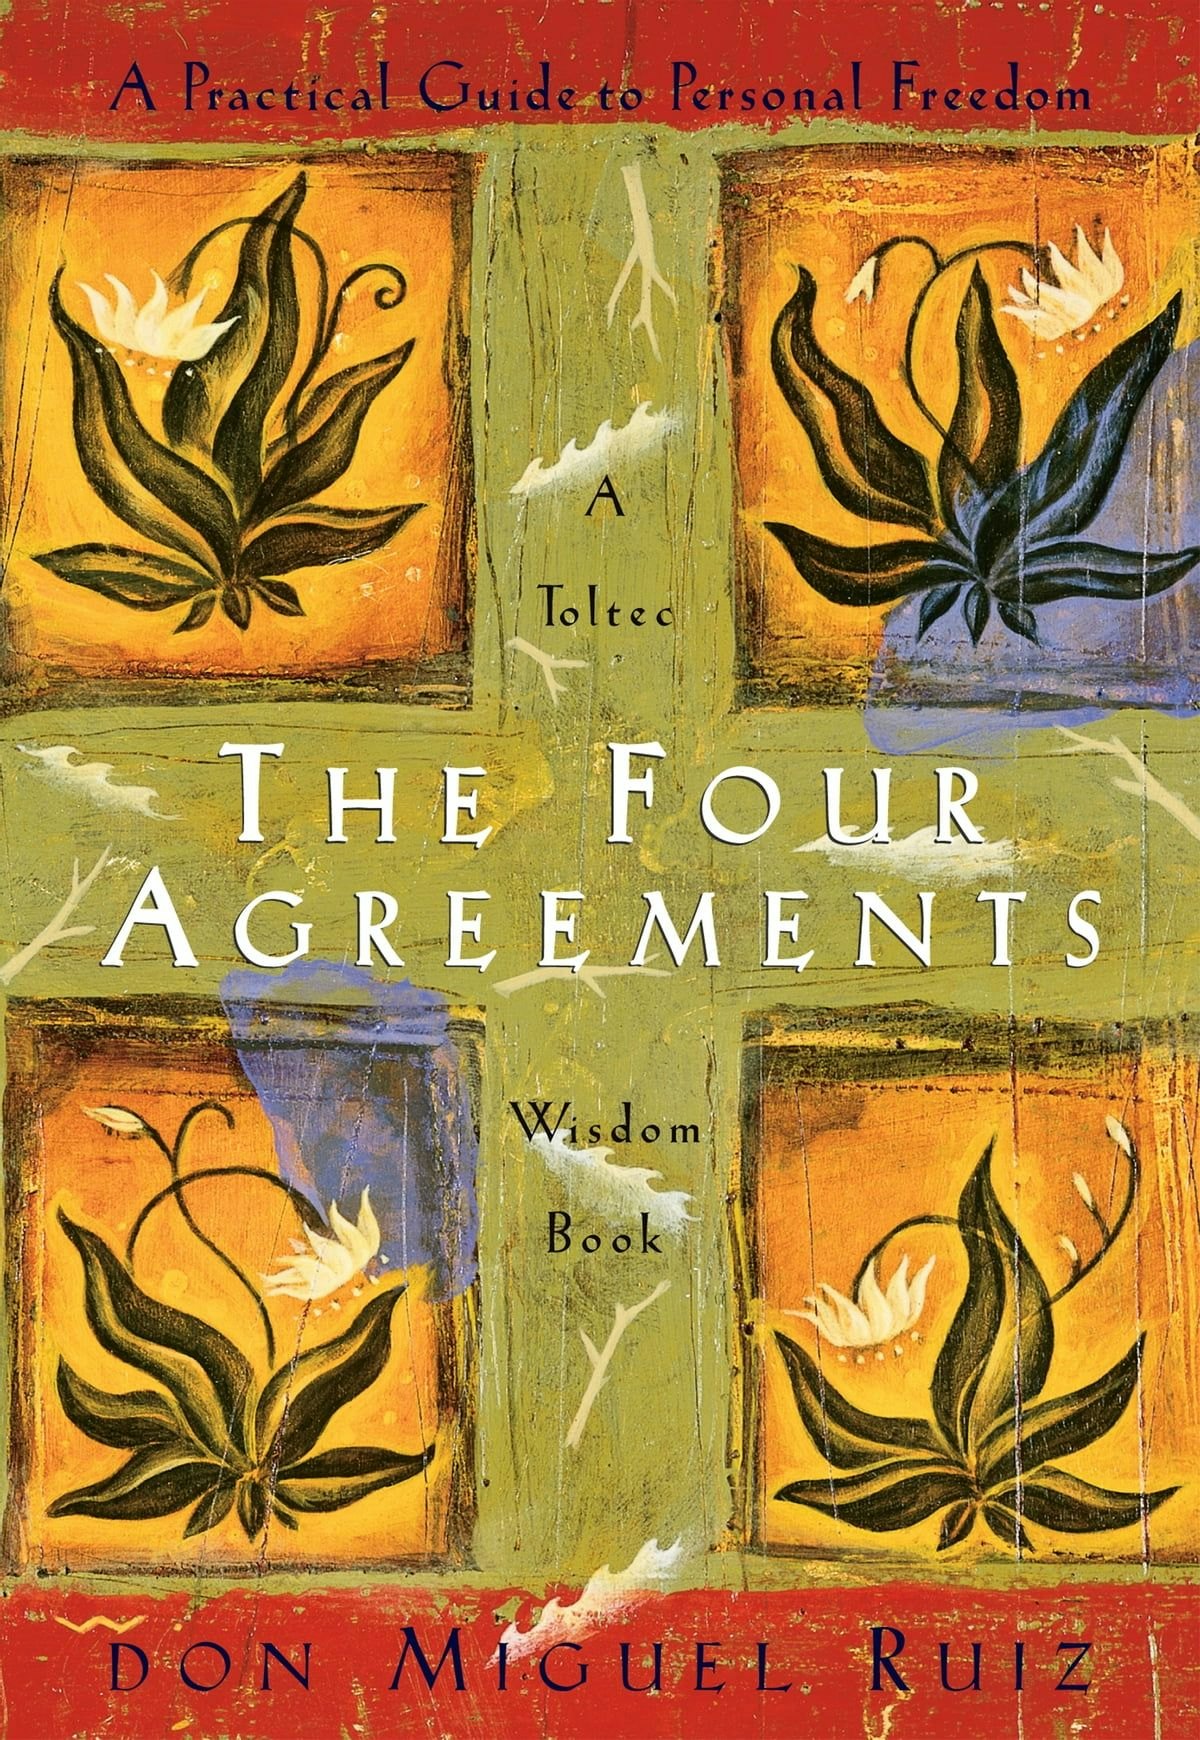 The Four Agreements by Don Miguel Ruiz for Conscious by Chloé